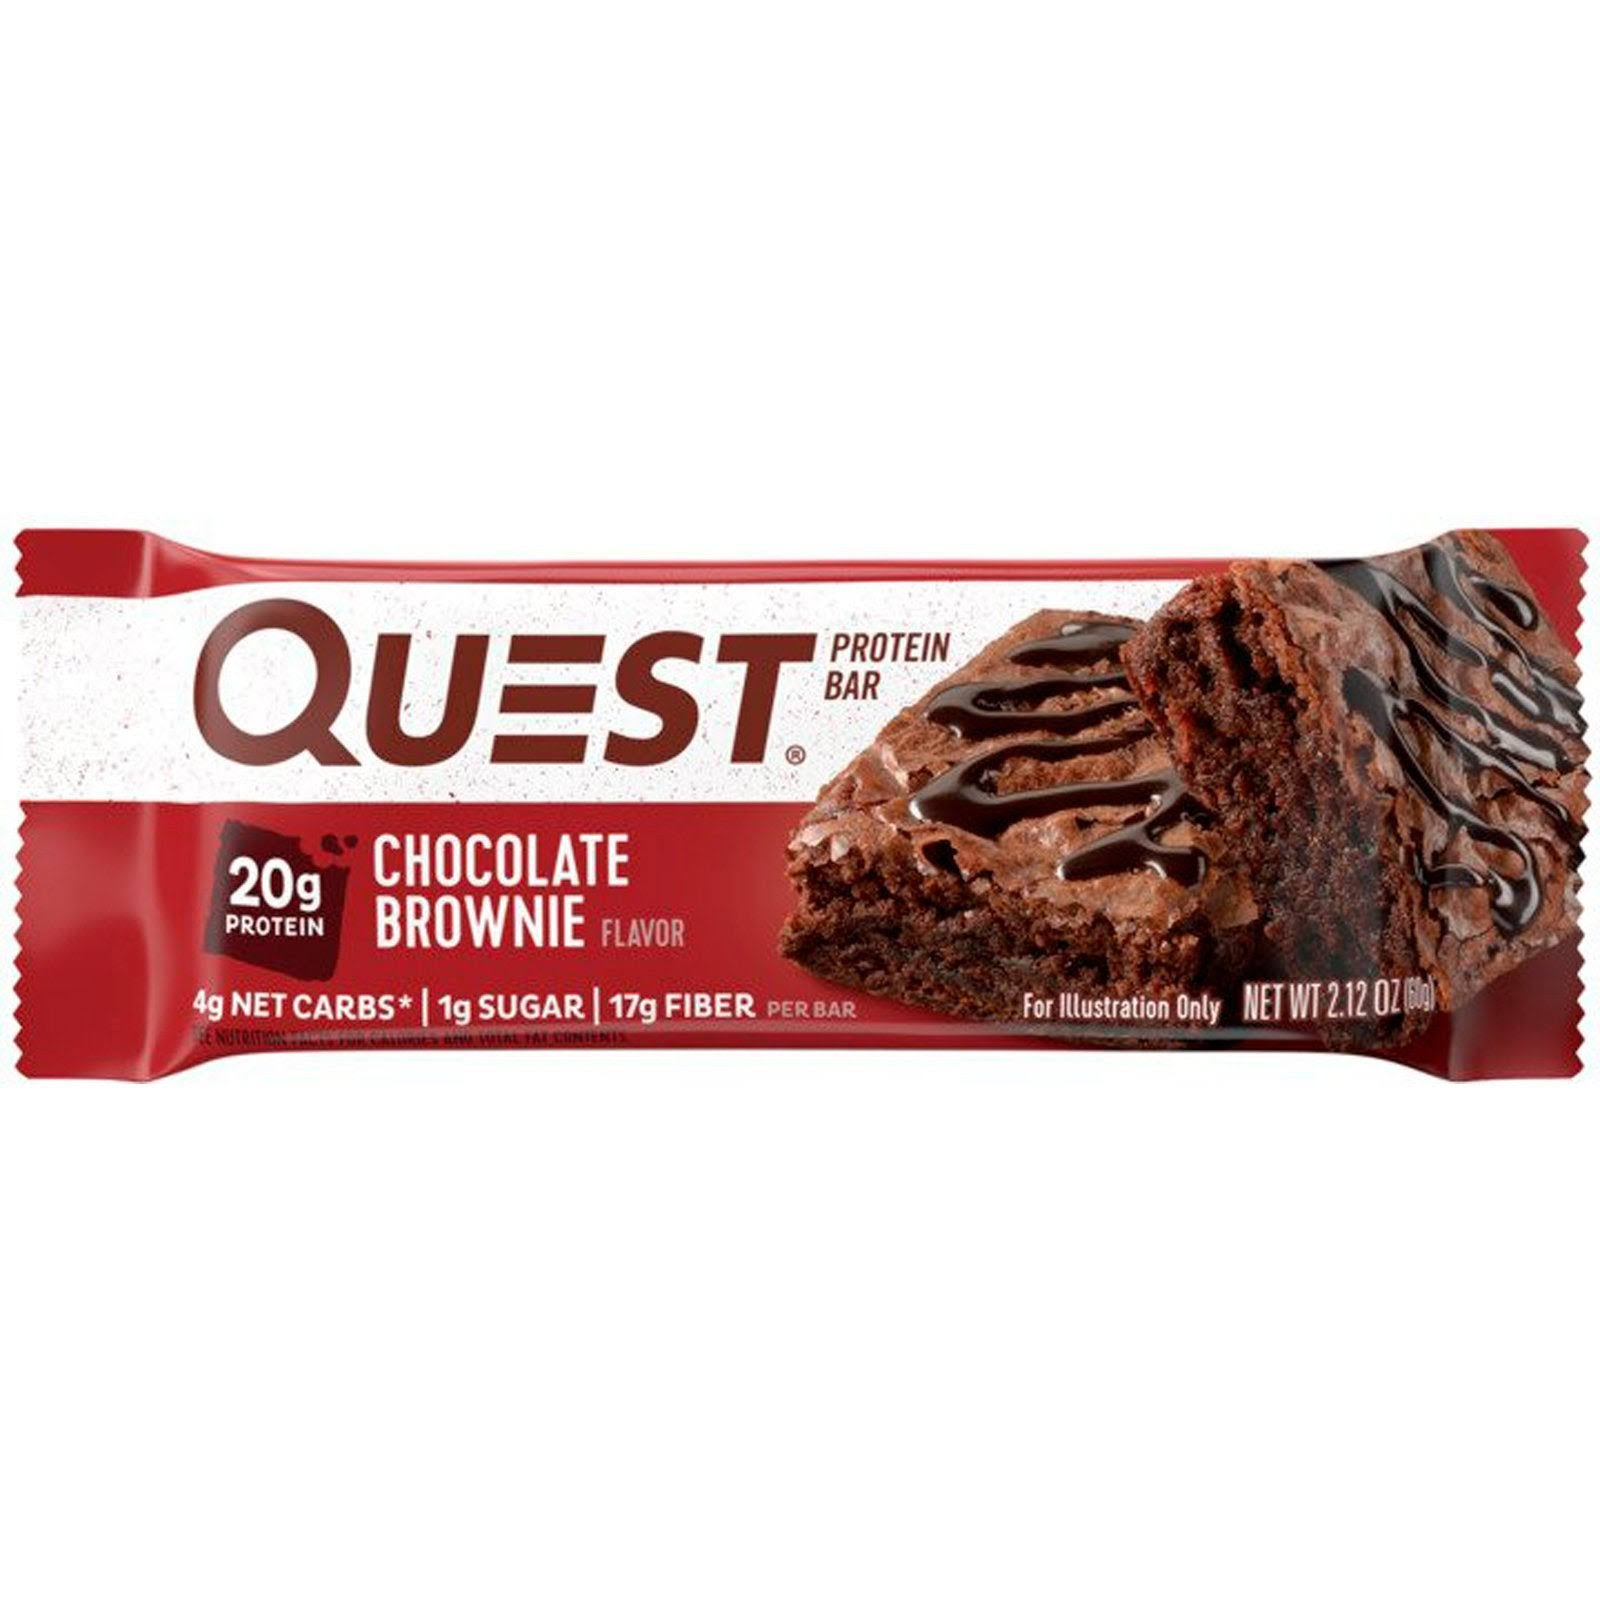 QUEST- Protein Bar CHOCOLATE BROWNIE